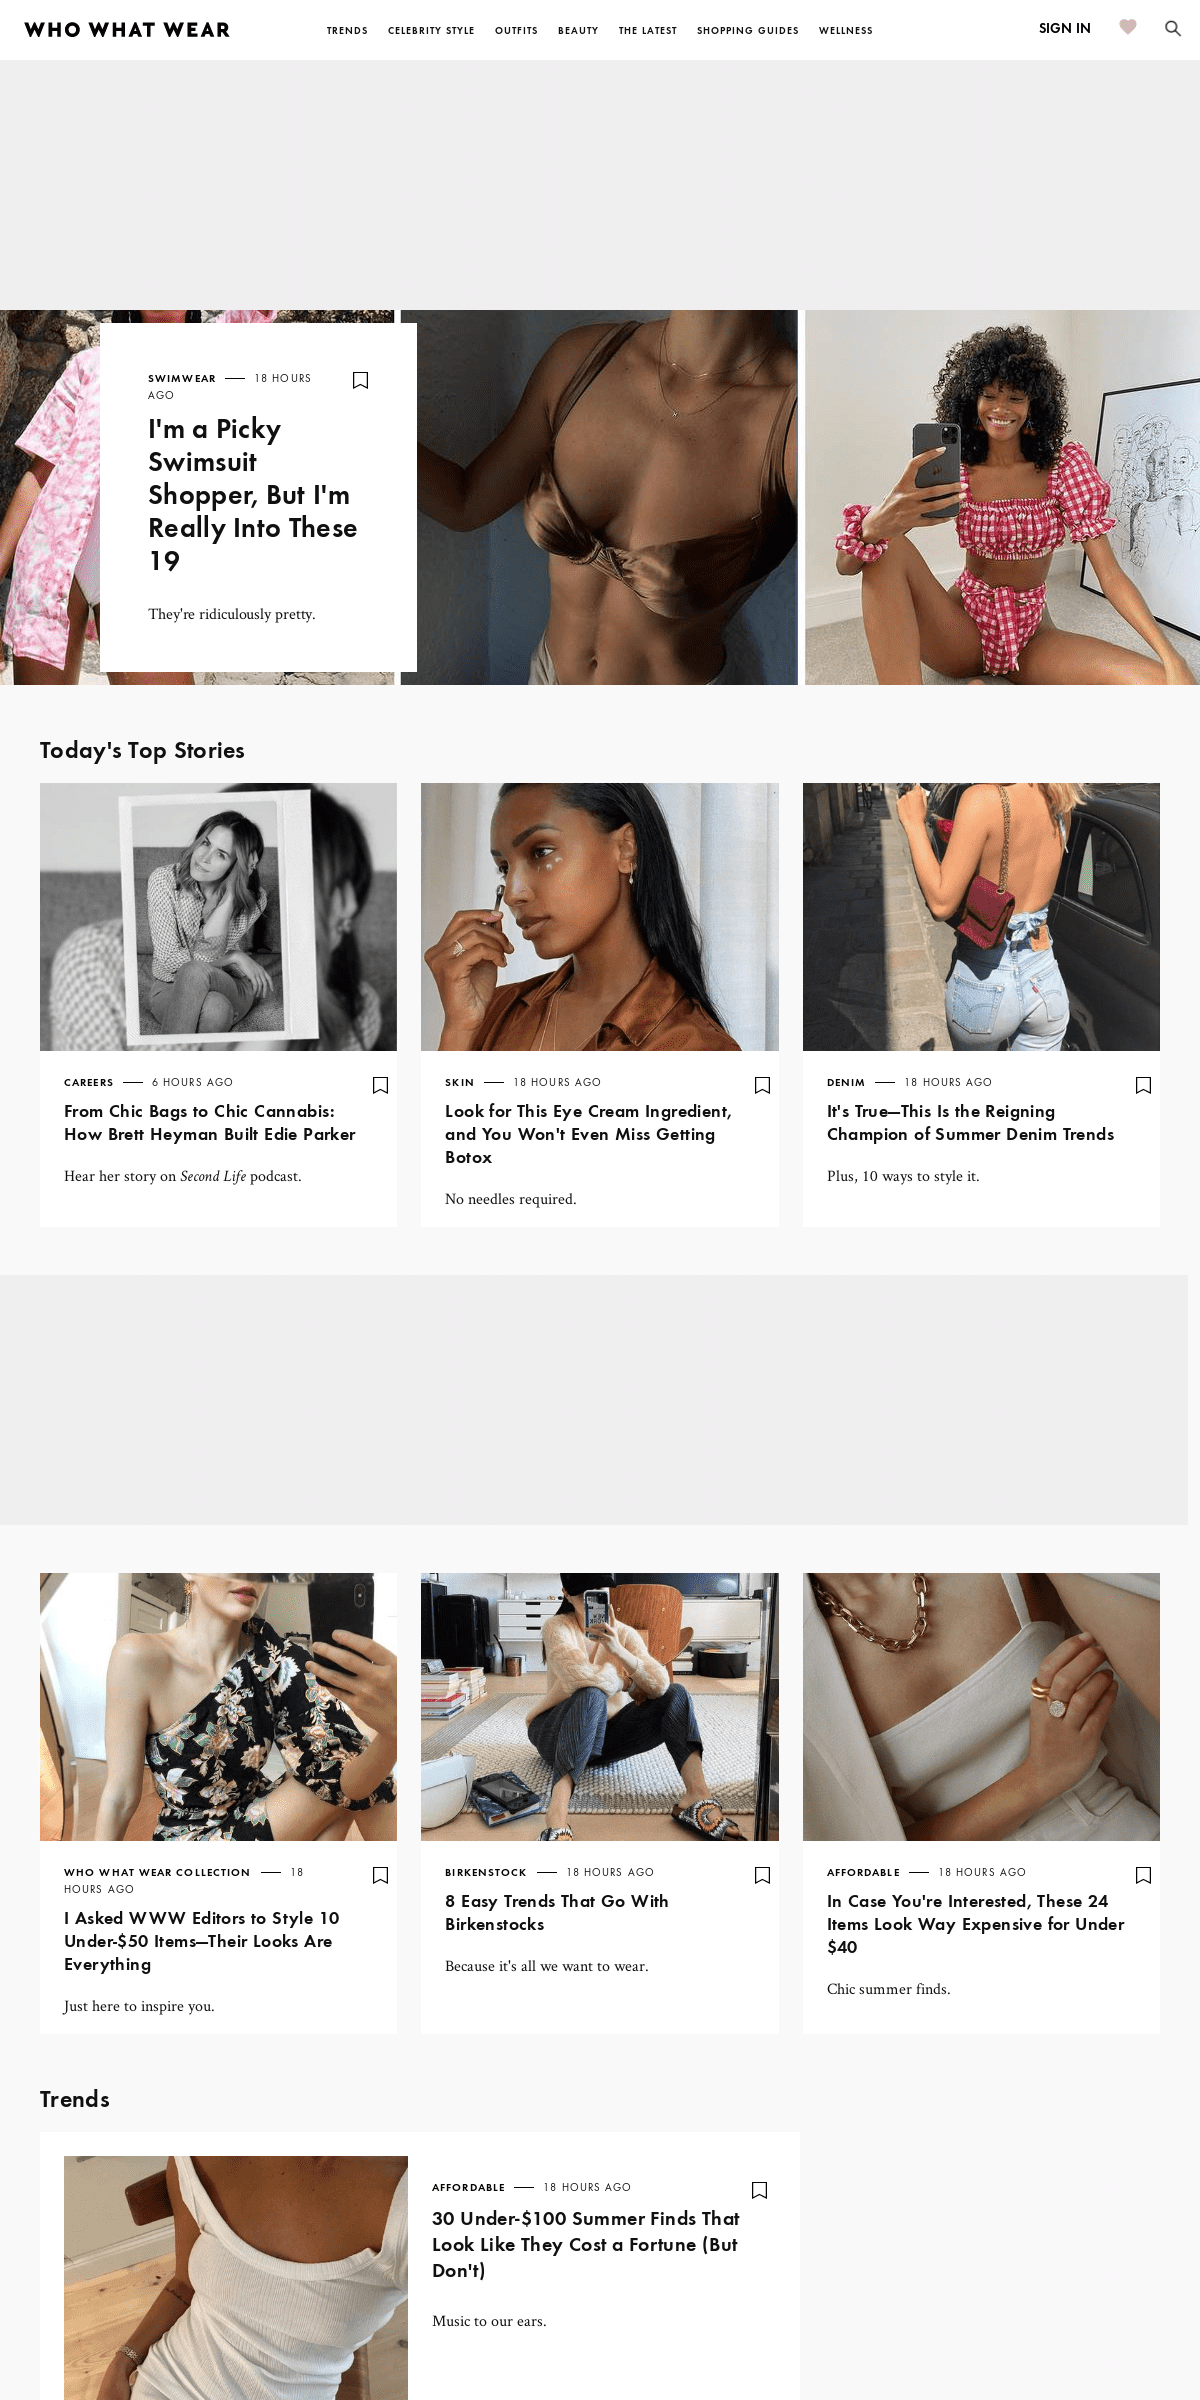 A complete backup of whowhatwear.com